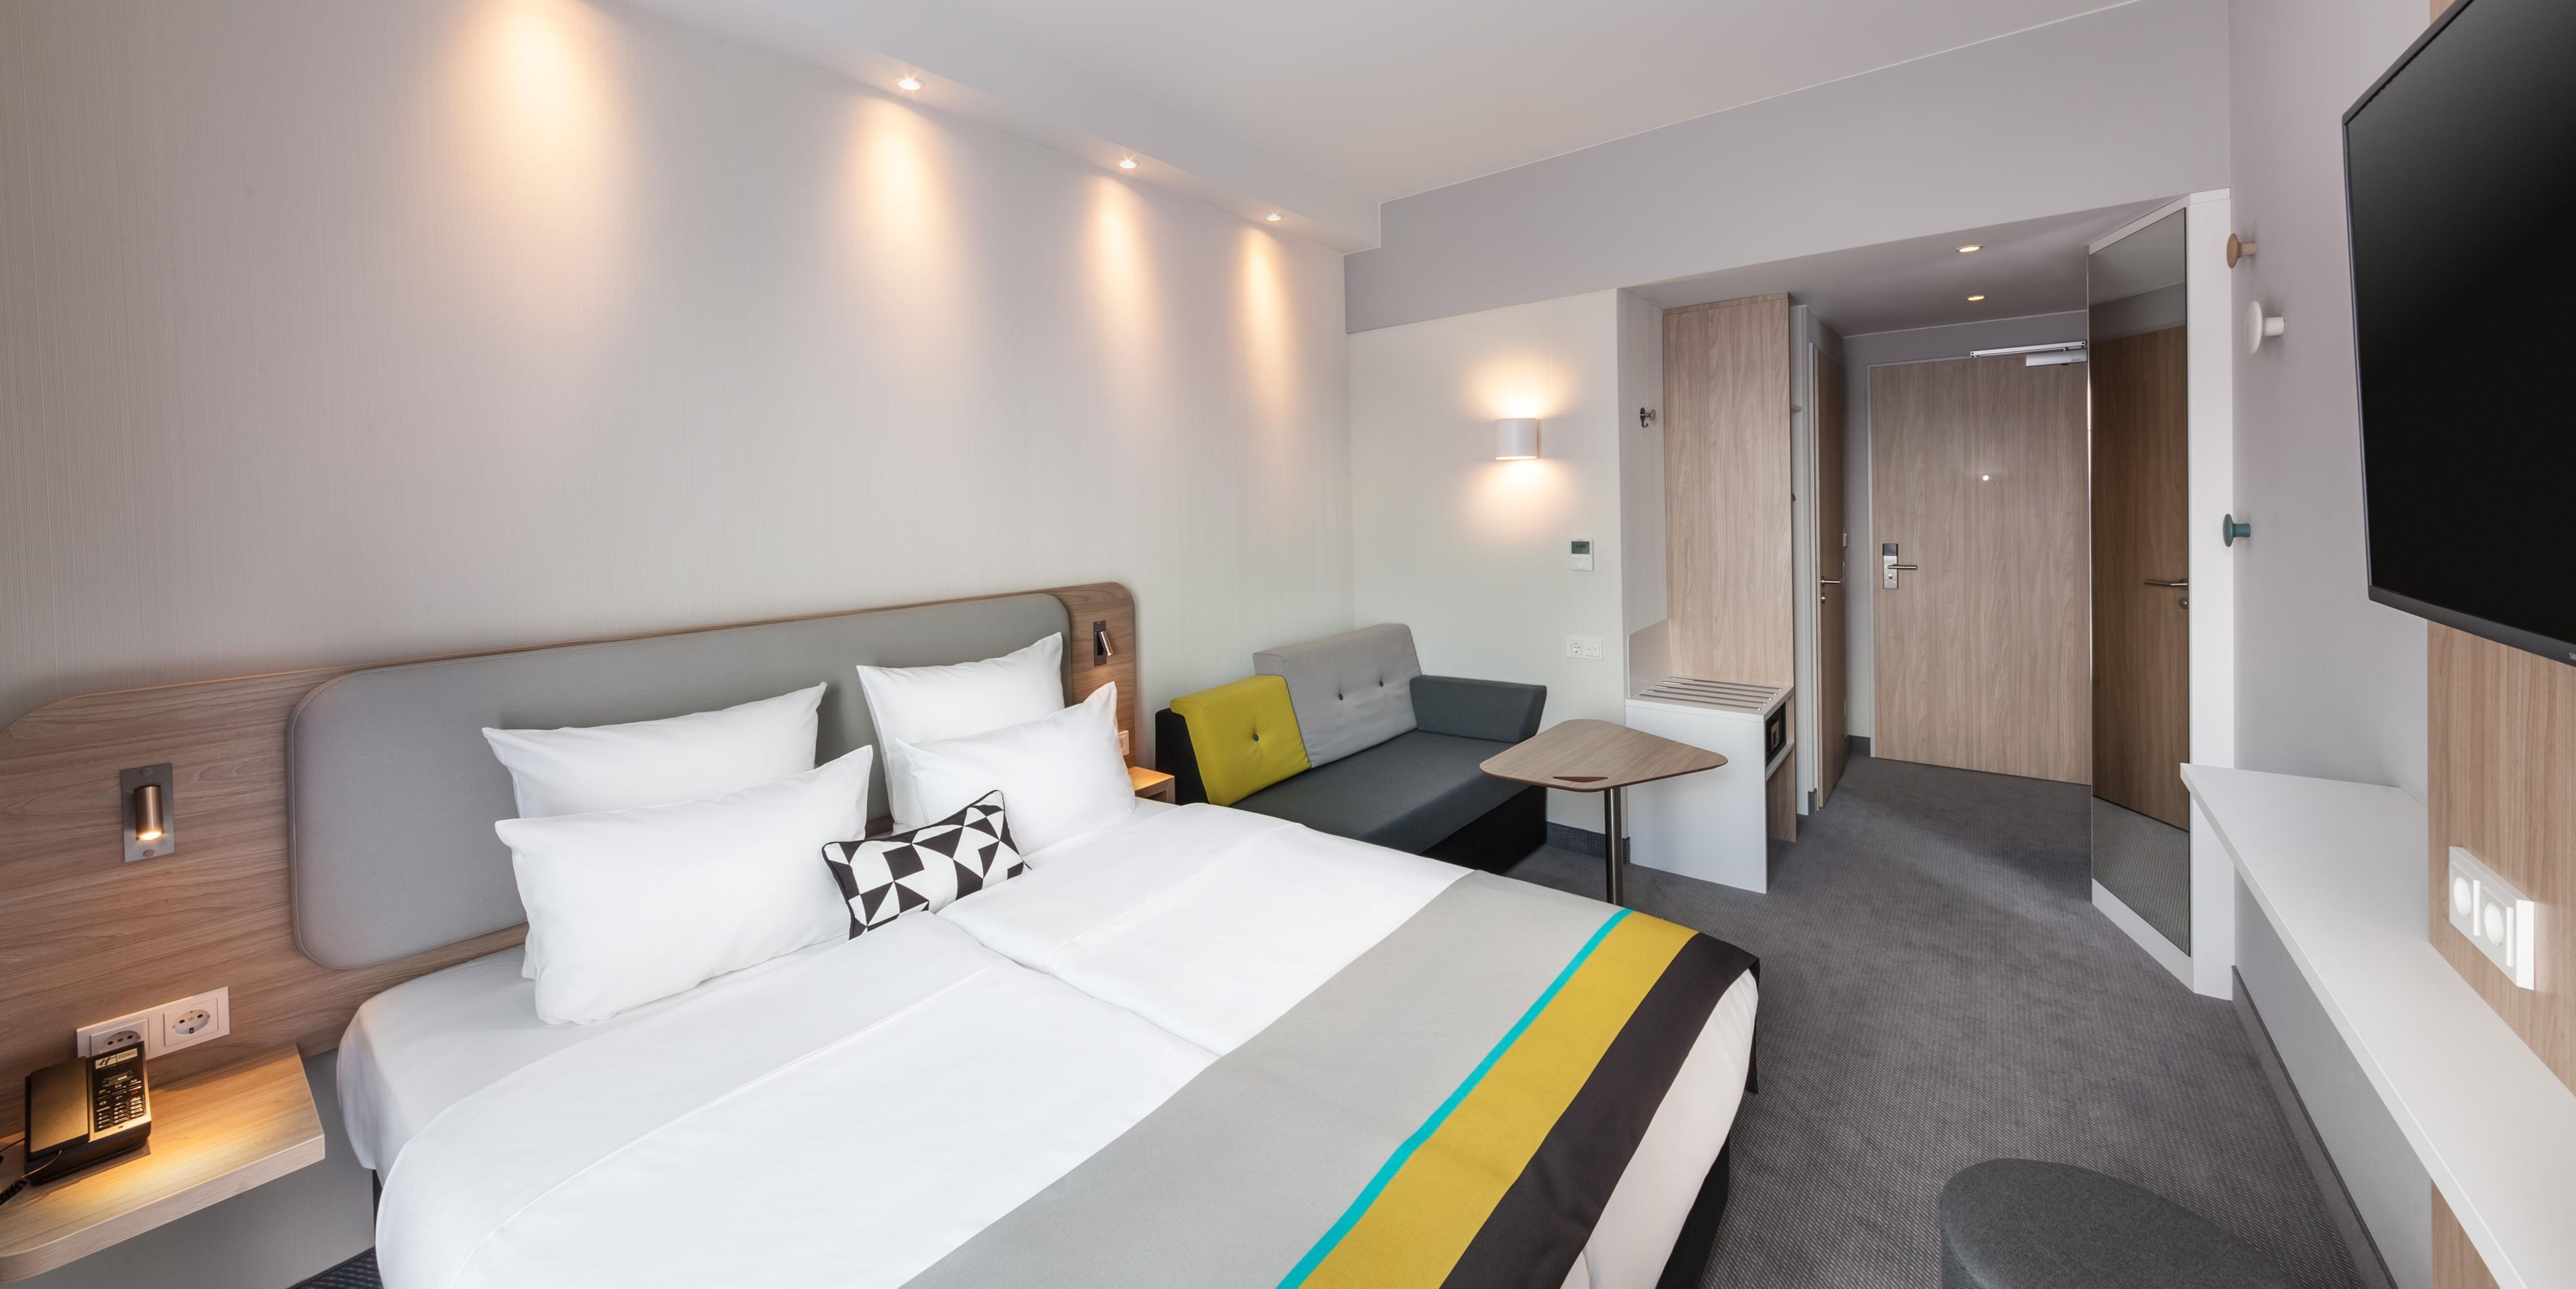 Rest easy at our Dusseldorf hotel, offering newly-renovated, soundproof rooms for the perfect night's sleep. Enjoy travel essentials, including comfortable beds with your choice of pillows, flatscreen Smart TVs, free Wi-Fi, a coffee maker, and an ergonomic workspace with USB charging. Families and groups will love our rooms with a sofa bed.